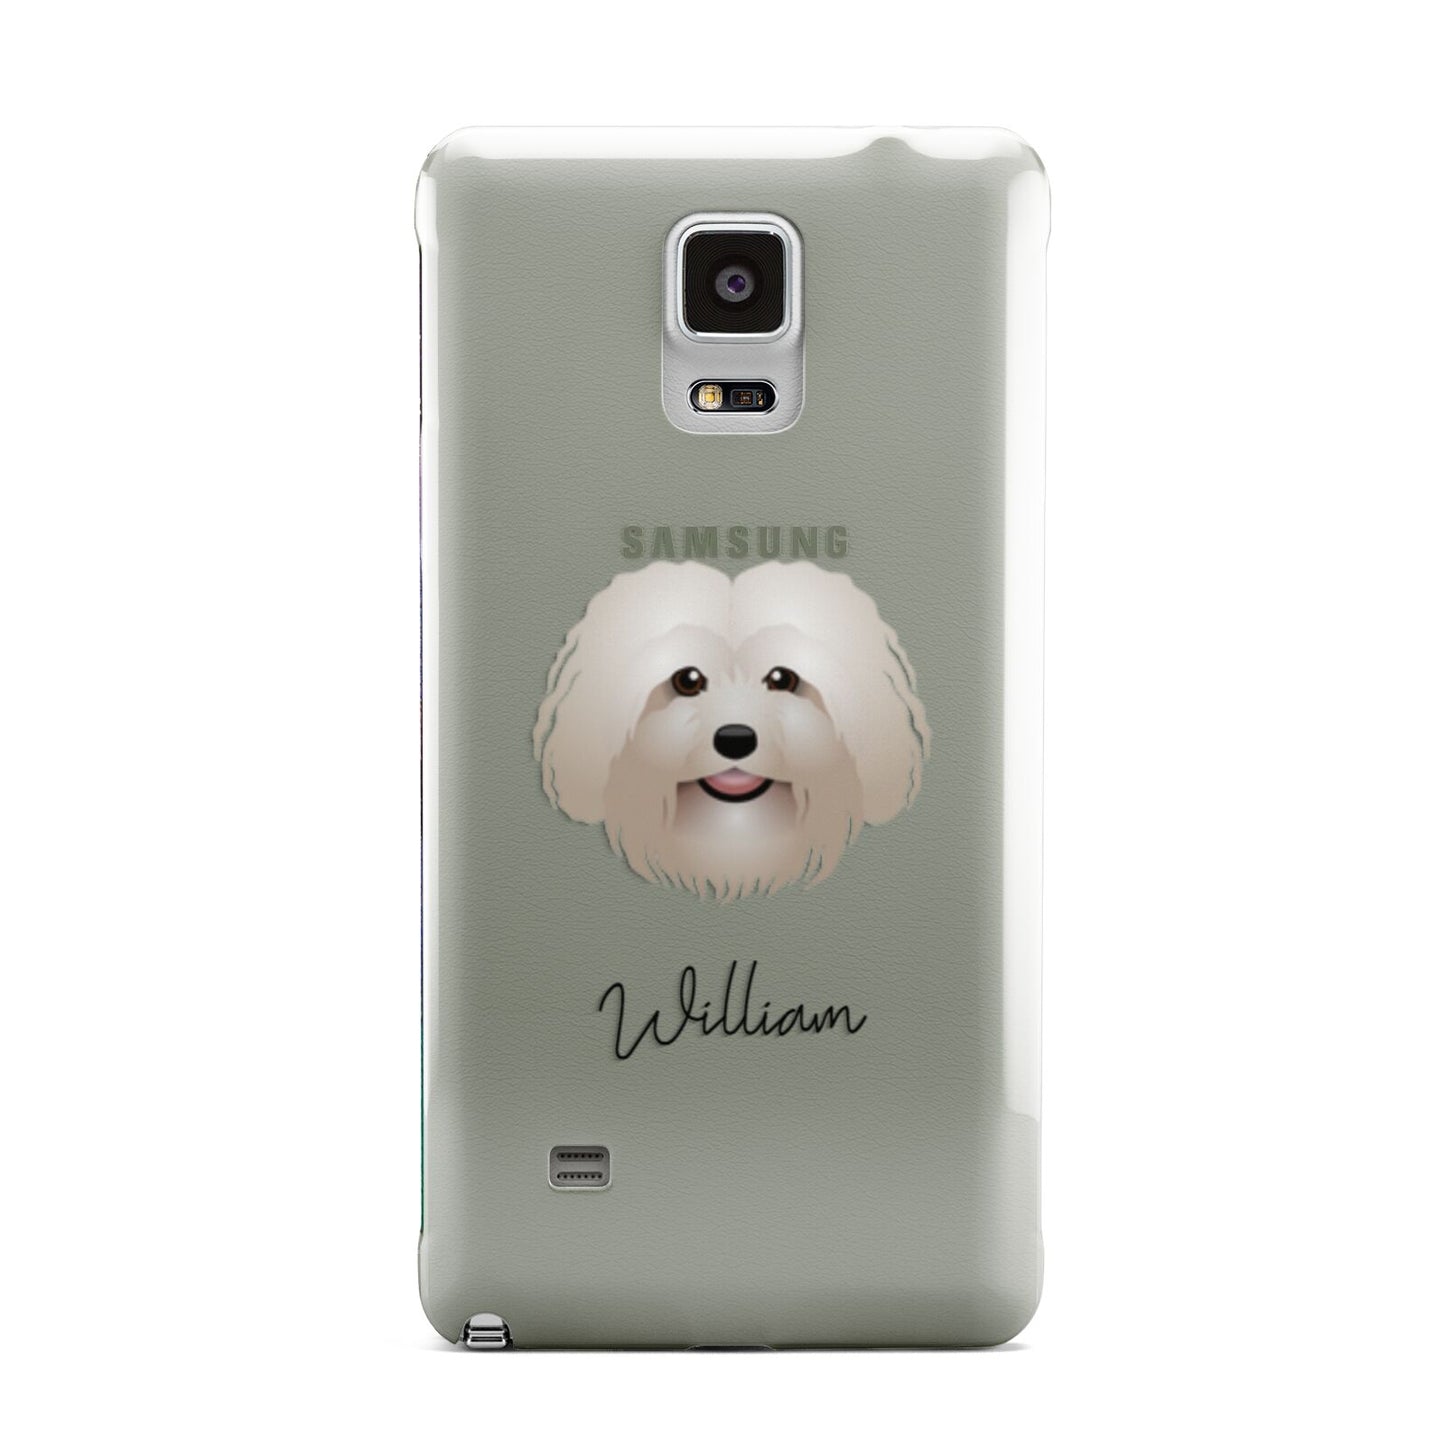 Bolognese Personalised Samsung Galaxy Note 4 Case